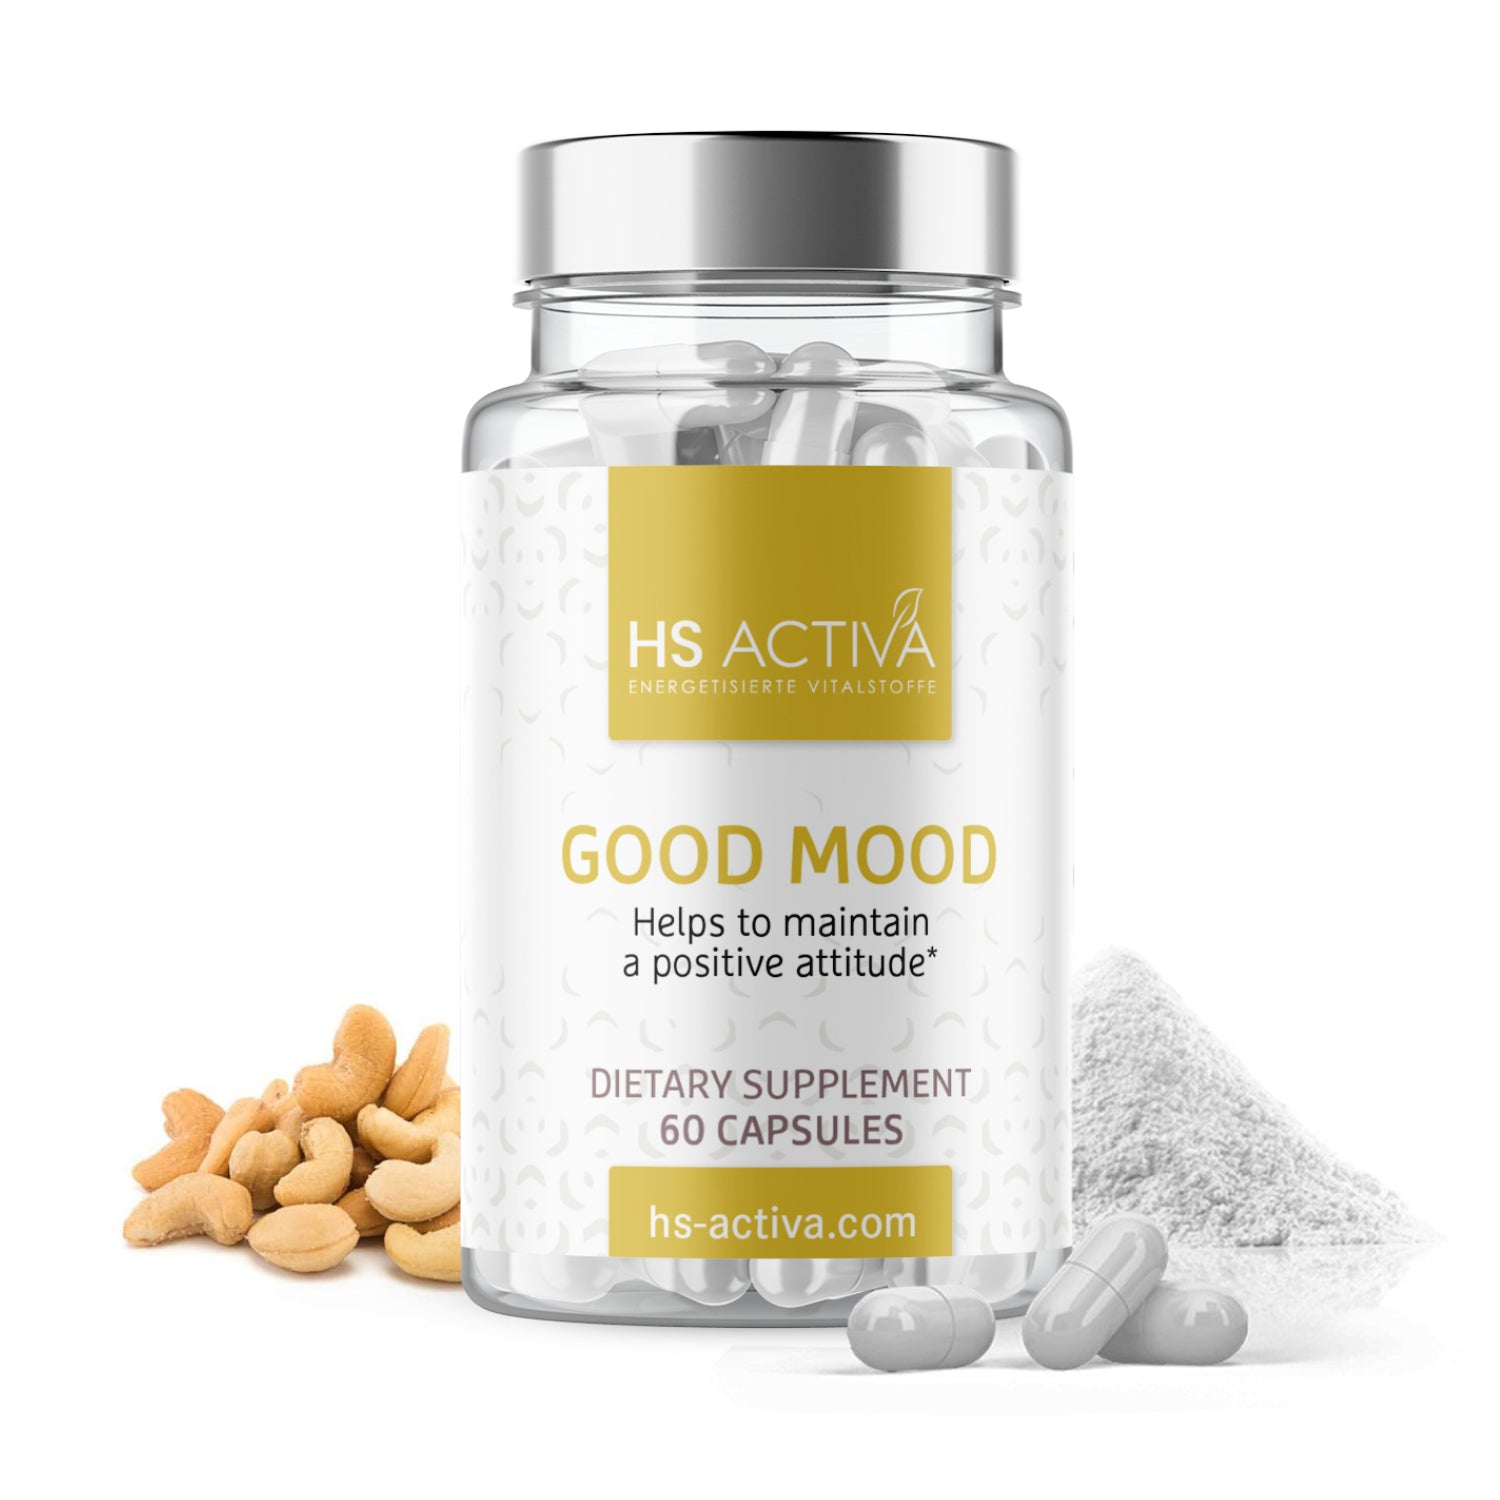 Good mood - Helps to maintain a positive attitude (60 capsules)